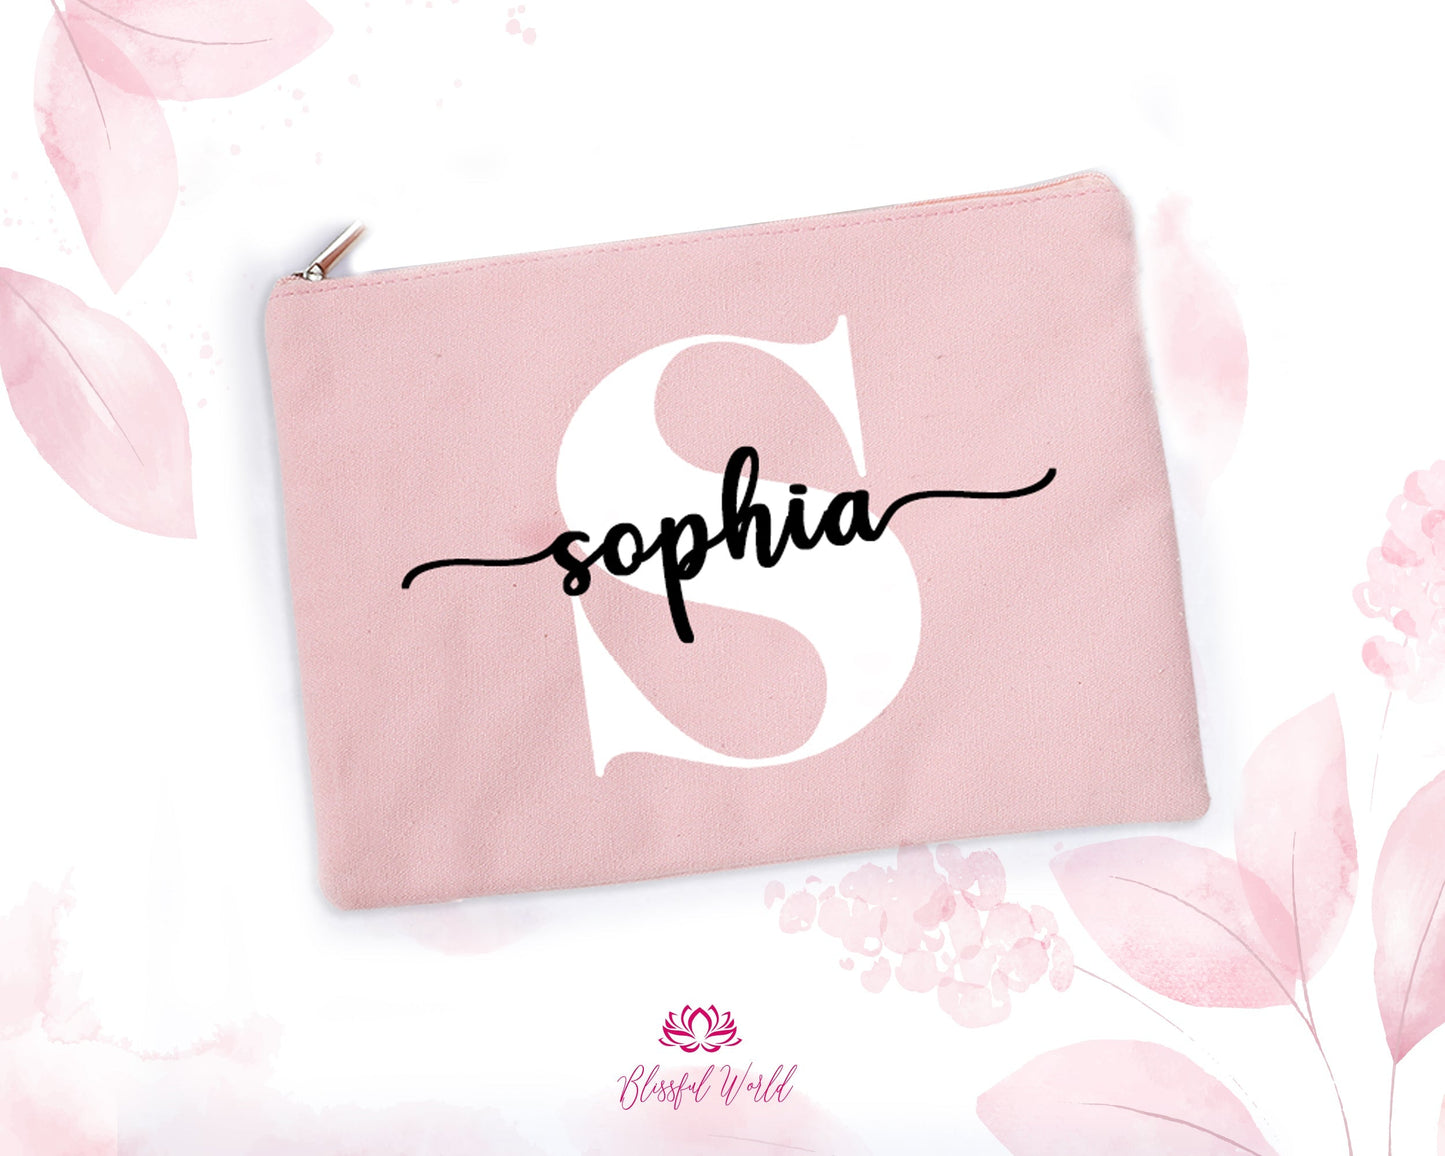 Bridesmaid Gifts Makeup Bag for her | Personalized Gifts for Mom | Bridesmaid Proposal | Best Friend Gifts | Custom Cosmetic Bags